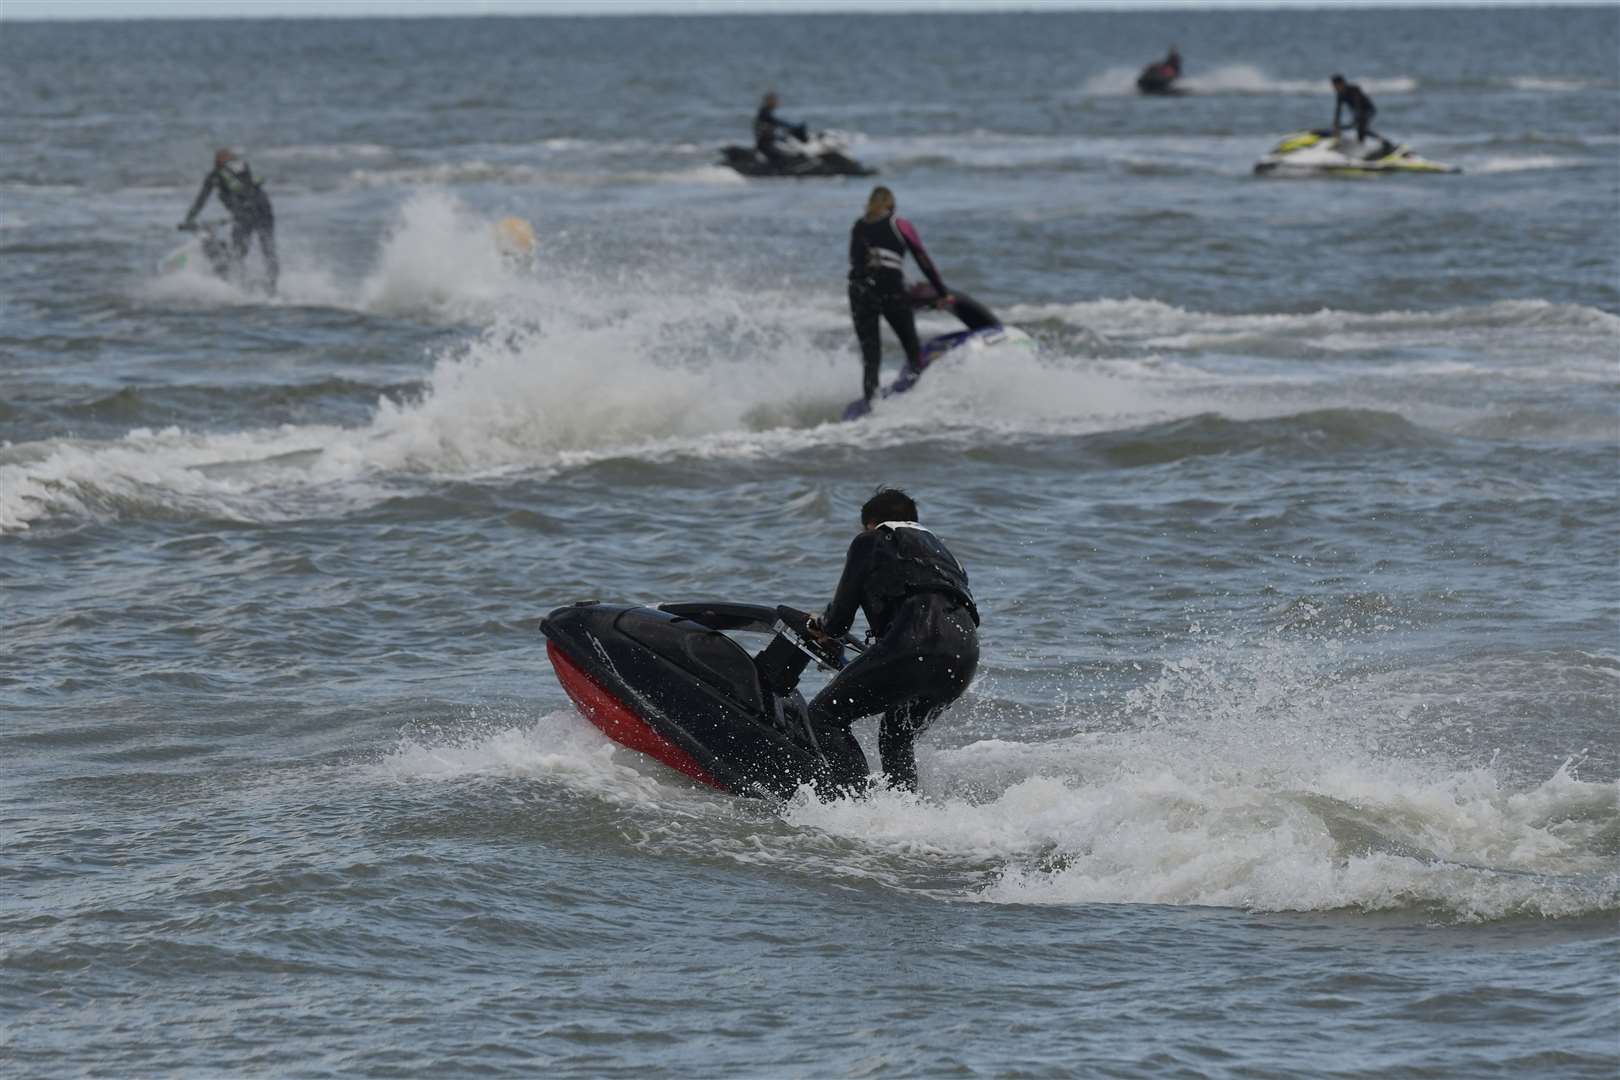 There are concerns about the speed and noise from jet skis in the district. Stock photo by Tony Flashman